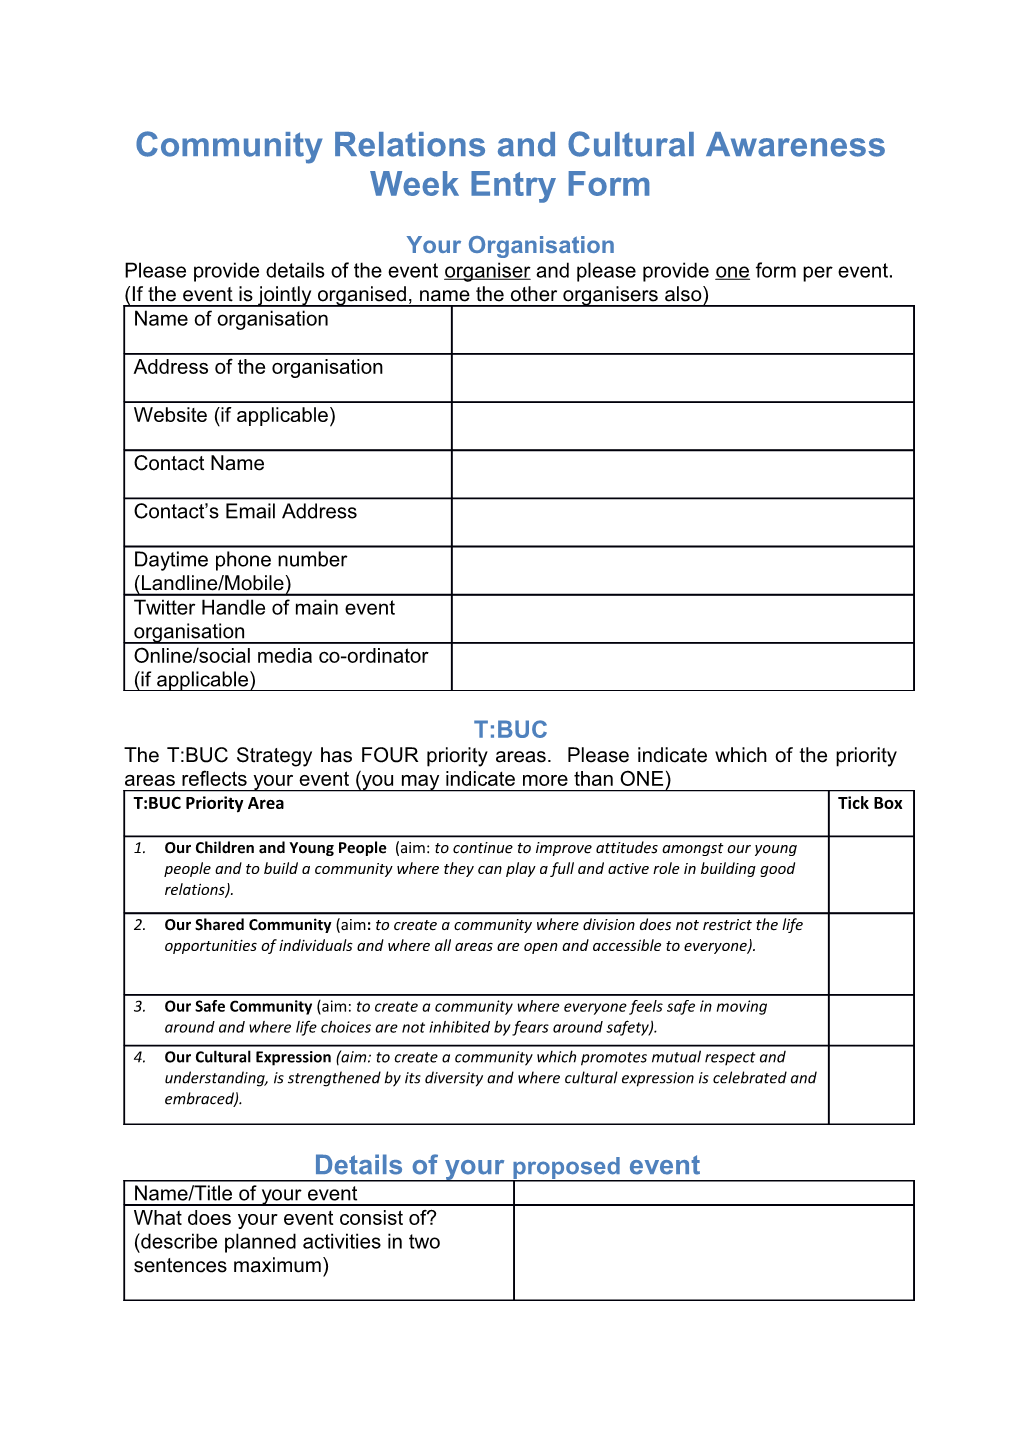 Community Relations and Cultural Awareness Week Entry Form